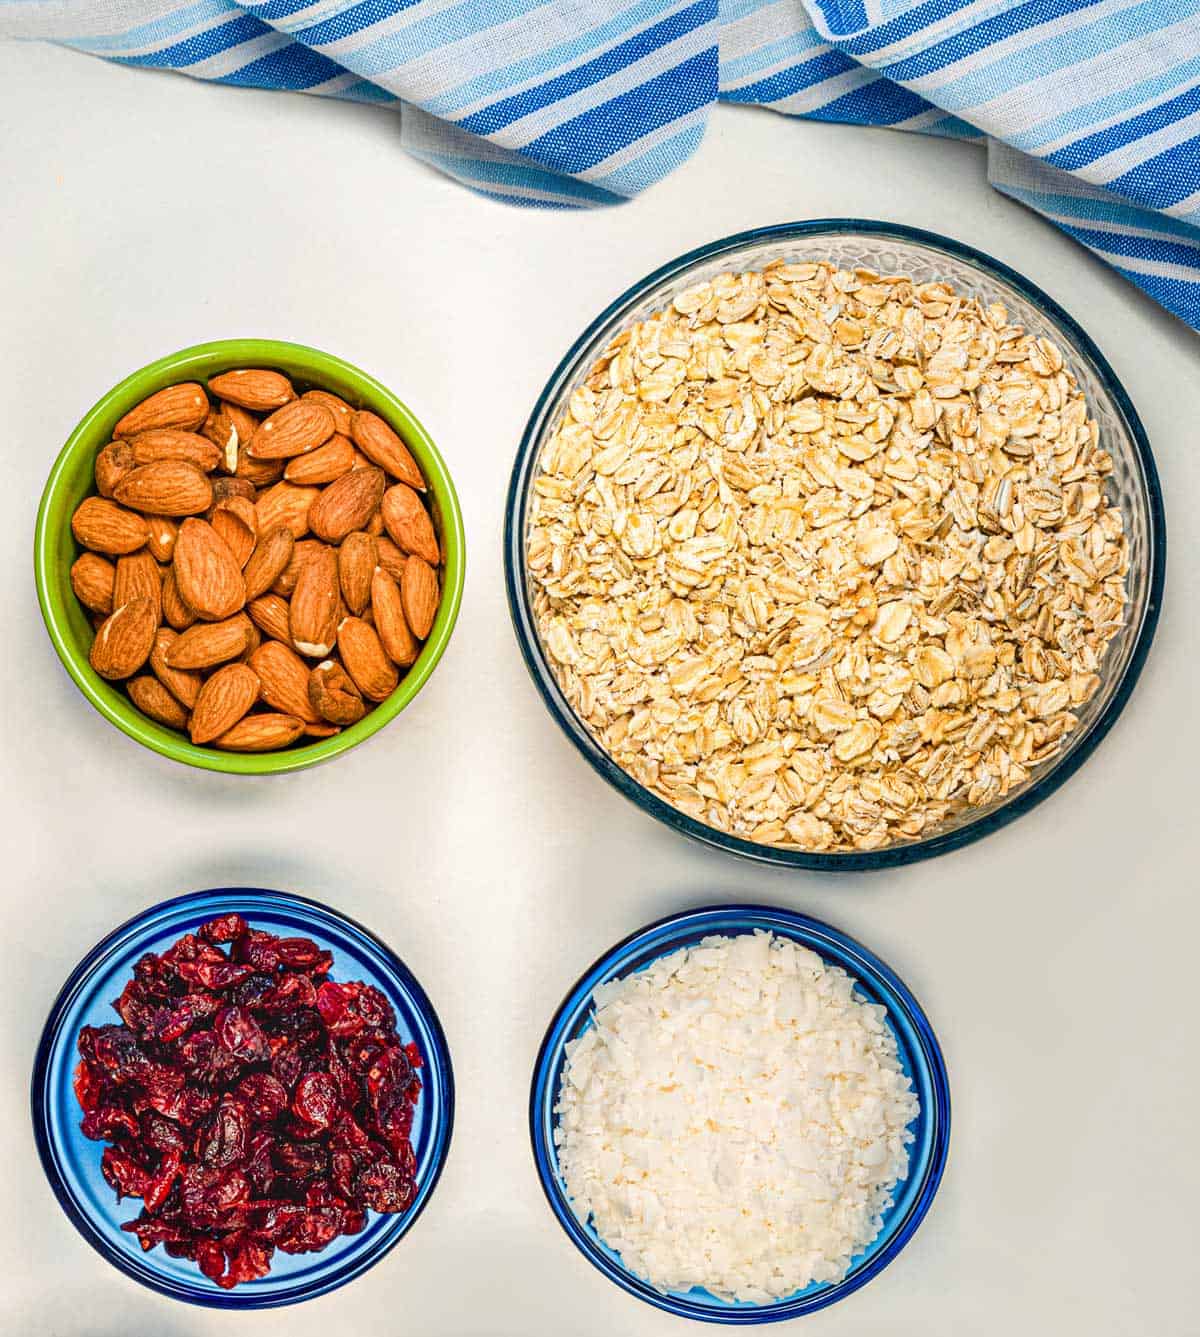 A bowl of oats, coconut, cranberries, and almonds.